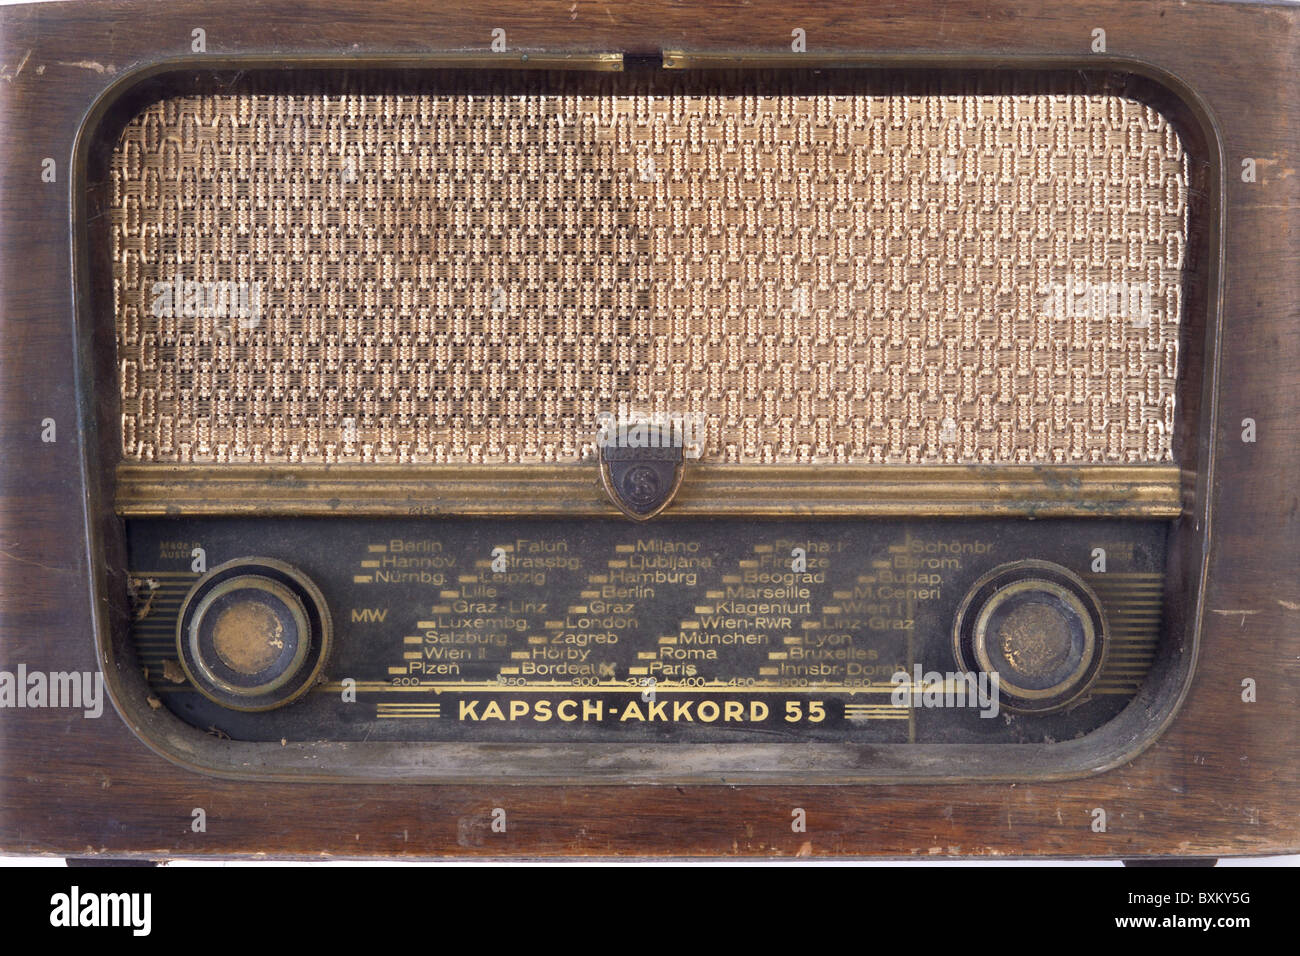 broadcast, radio set, Kapsch Akkord 55, Austria, 1954, dirty, defect, e-waste, electronic, technics, Austrian, design, Gelsenkirchen Baroque, front panel, 1950s, 50s, 20th century, historic, historical, Additional-Rights-Clearences-Not Available Stock Photo